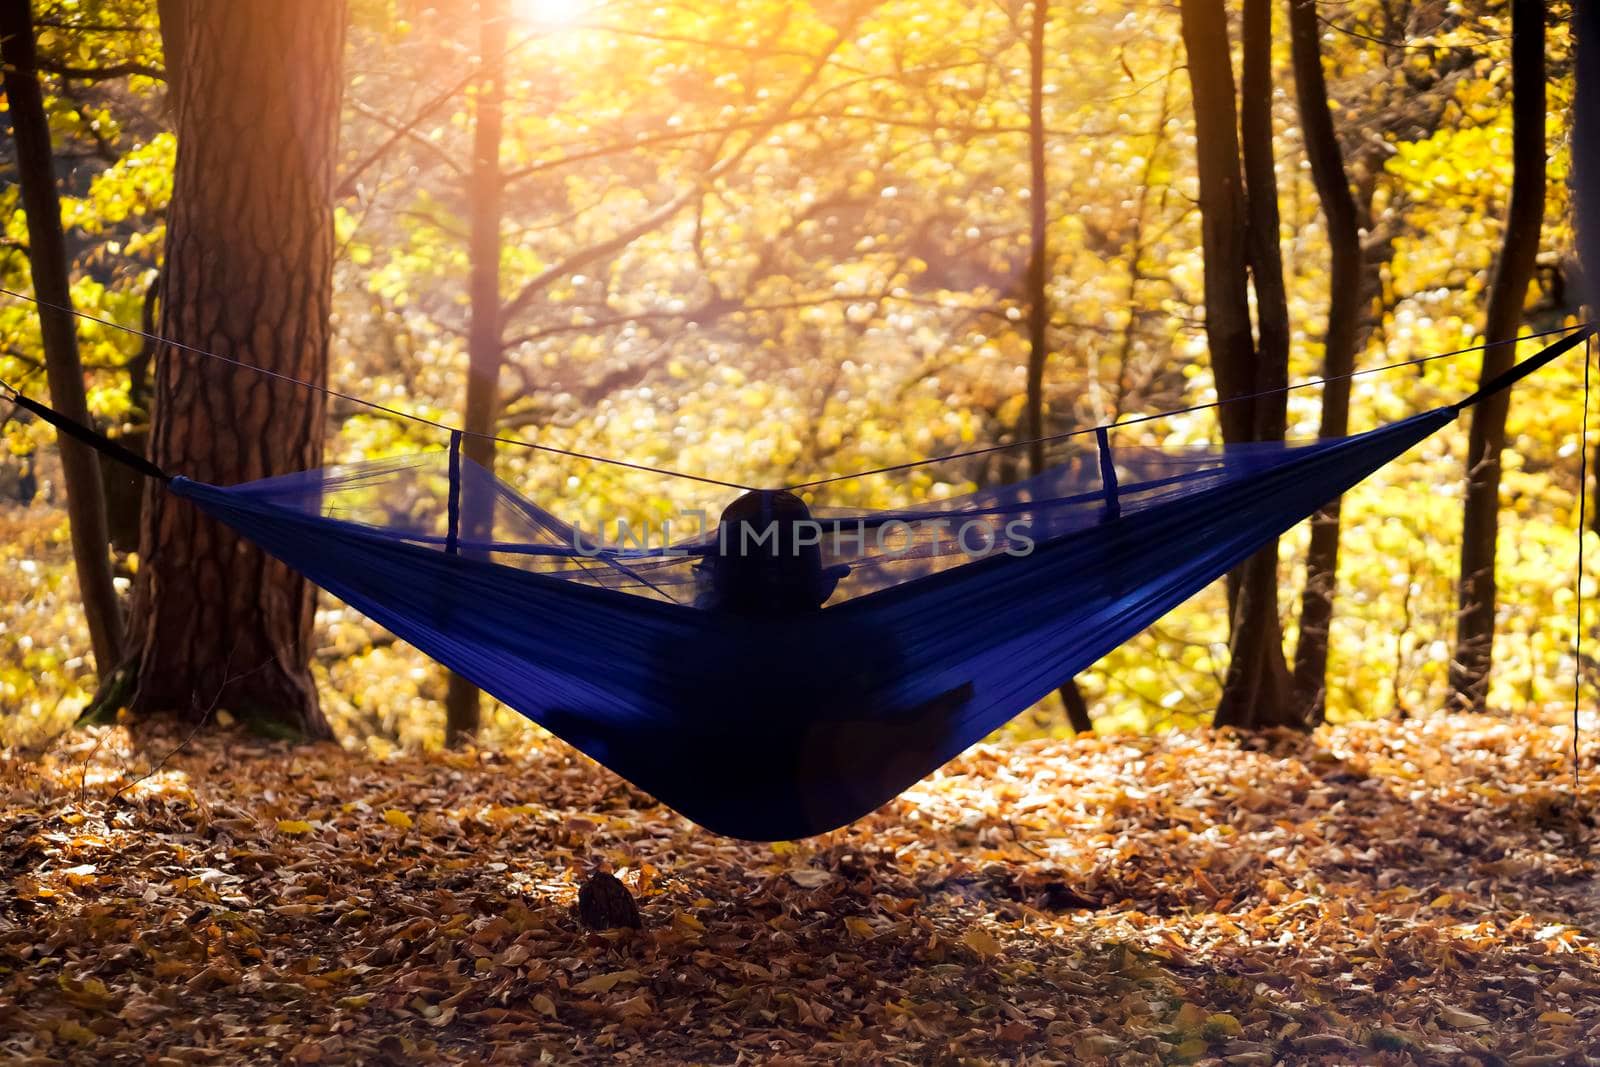 A person enjoys the autumn scenery and golden foliage in the trees while sitting in a hammock at sunset in an idyllic meditative mood.